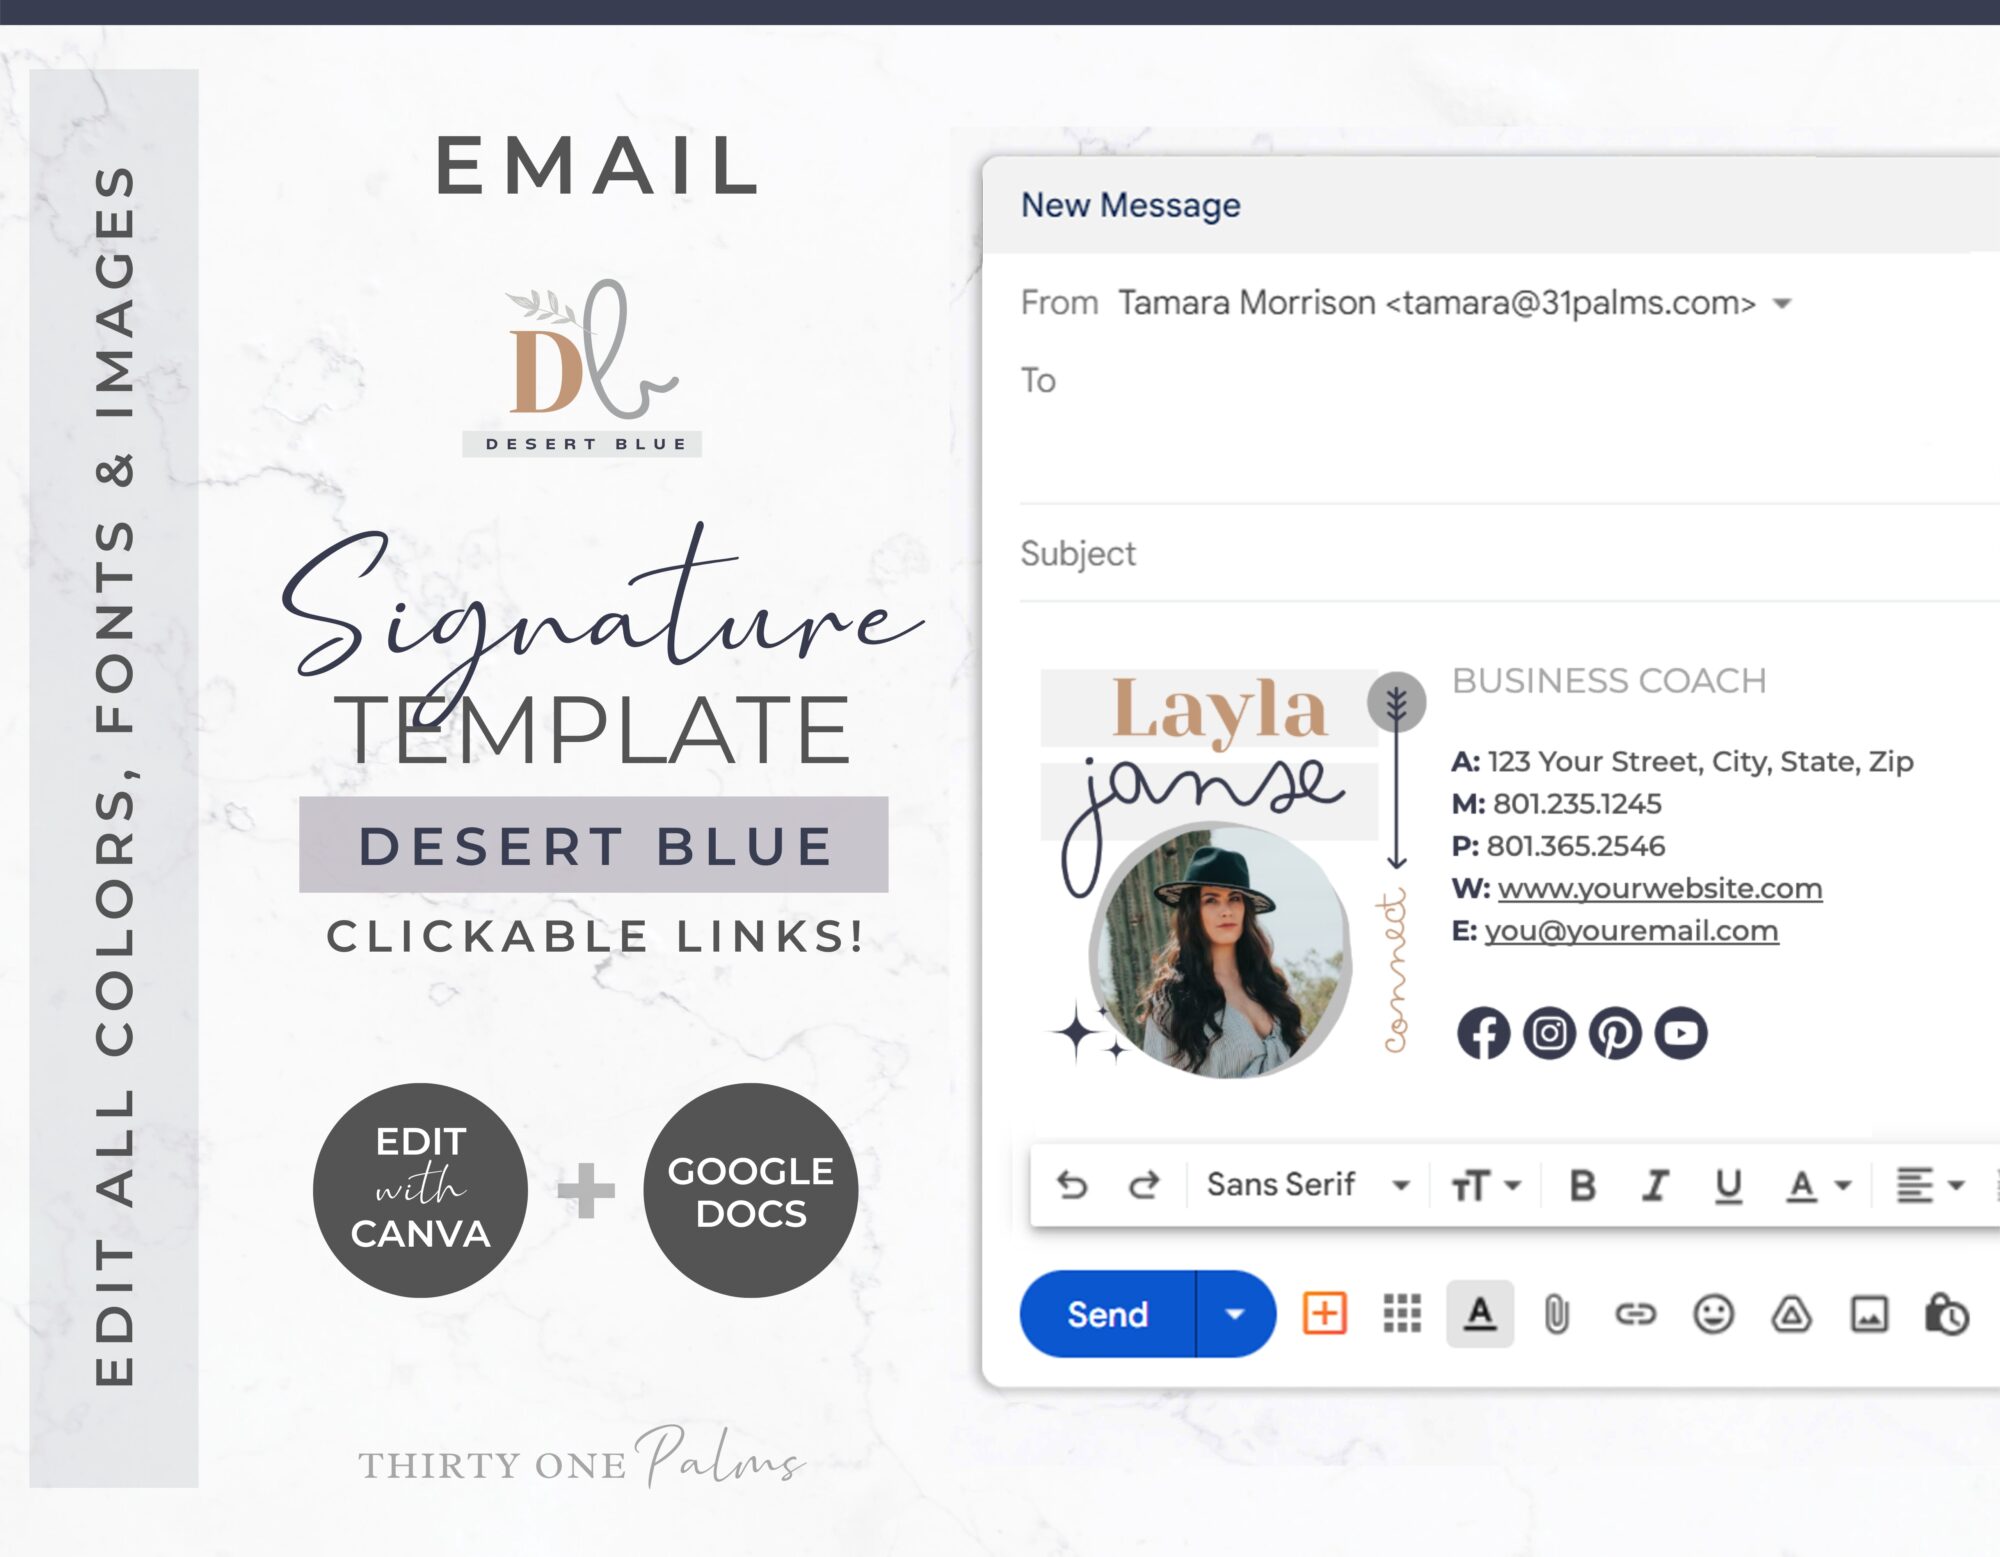 Gmail Email Signature Template for Canva – Desert Blue